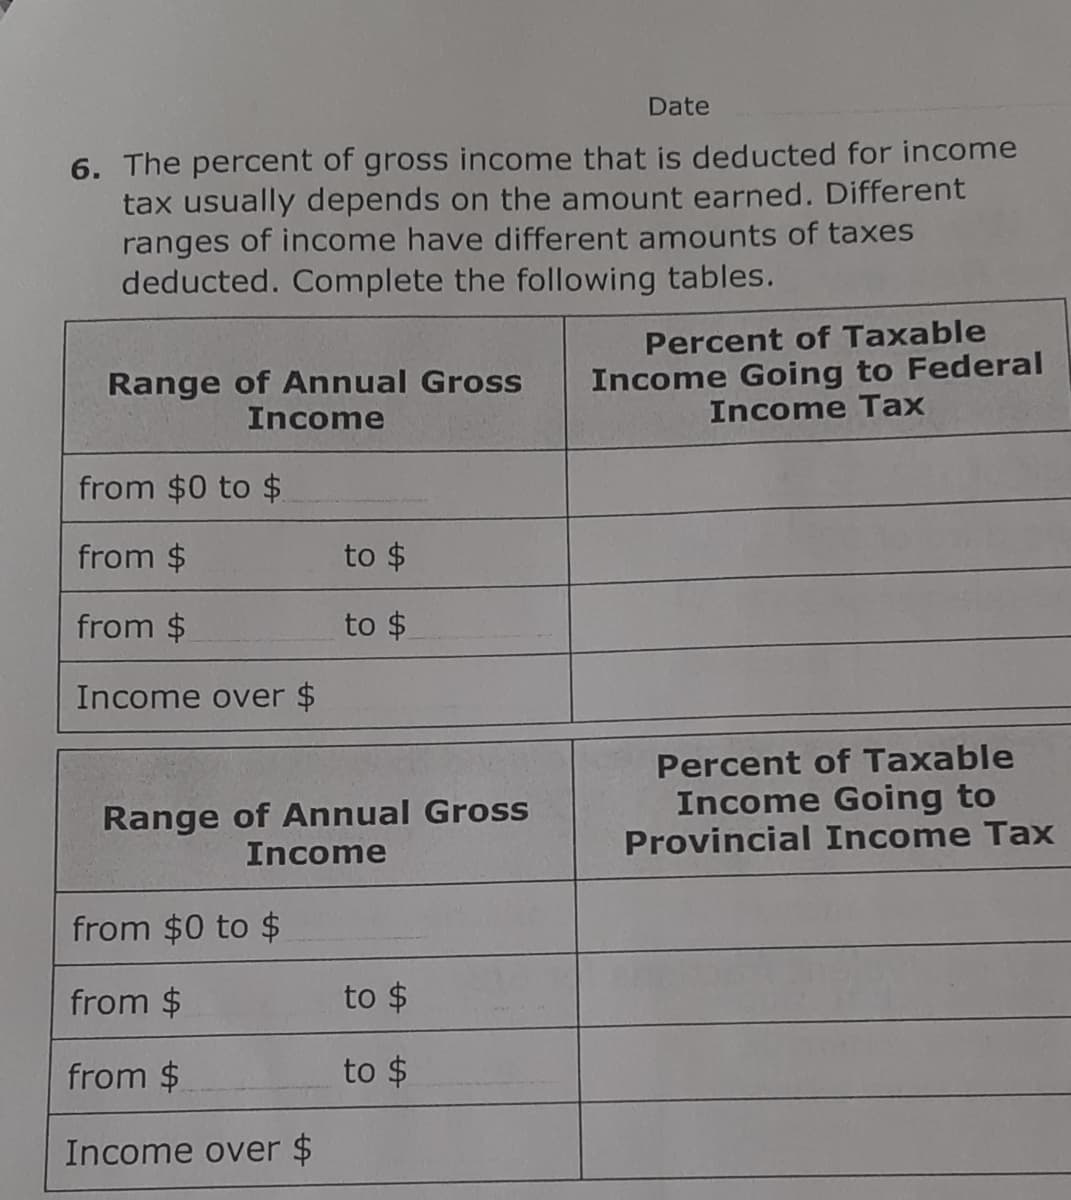 Date
6. The percent of gross income that is deducted for income
tax usually depends on the amount earned. Different
ranges of income have different amounts of taxes
deducted. Complete the following tables.
Range of Annual Gross
Income
Percent of Taxable
Income Going to Federal
Income Tax
from $0 to $
from $
to $
from $
to $
Income over $
Percent of Taxable
Range of Annual Gross
Income Going to
Income
Provincial Income Tax
from $0 to $
from $
from $
Income over $
to $
to $